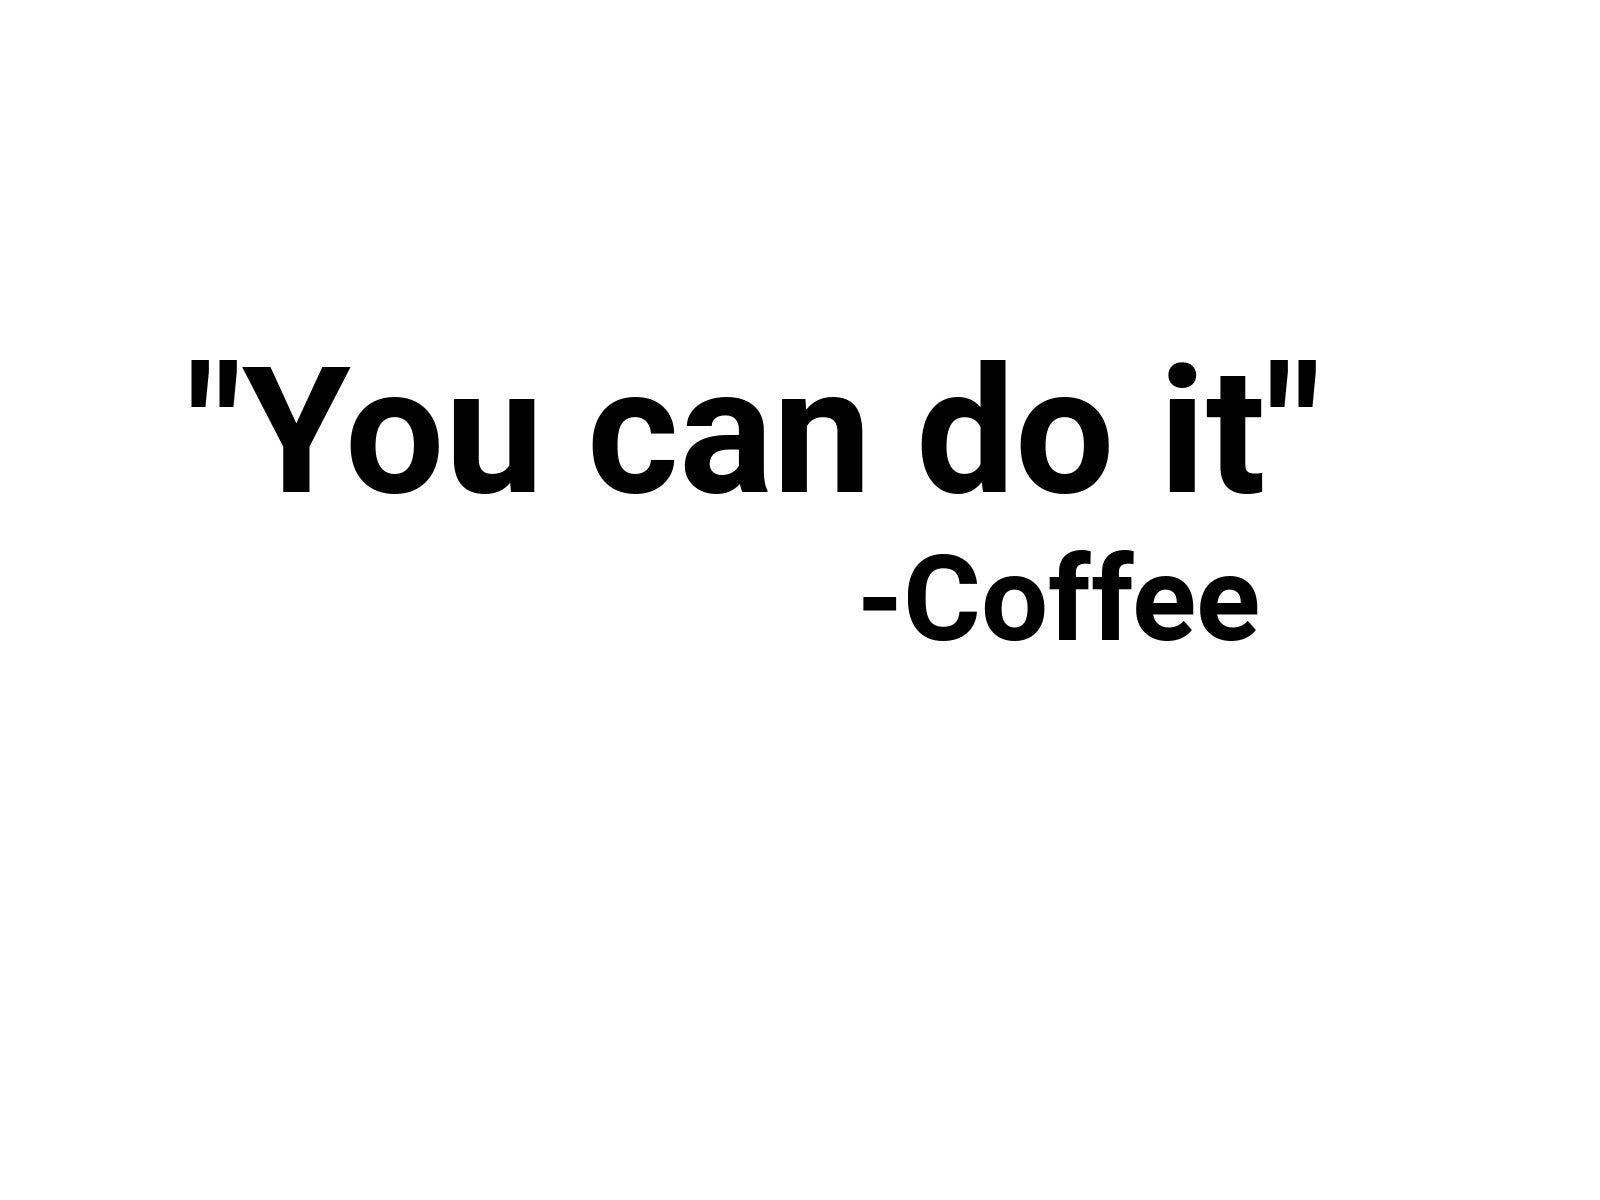 "You Can Do It" - Coffee